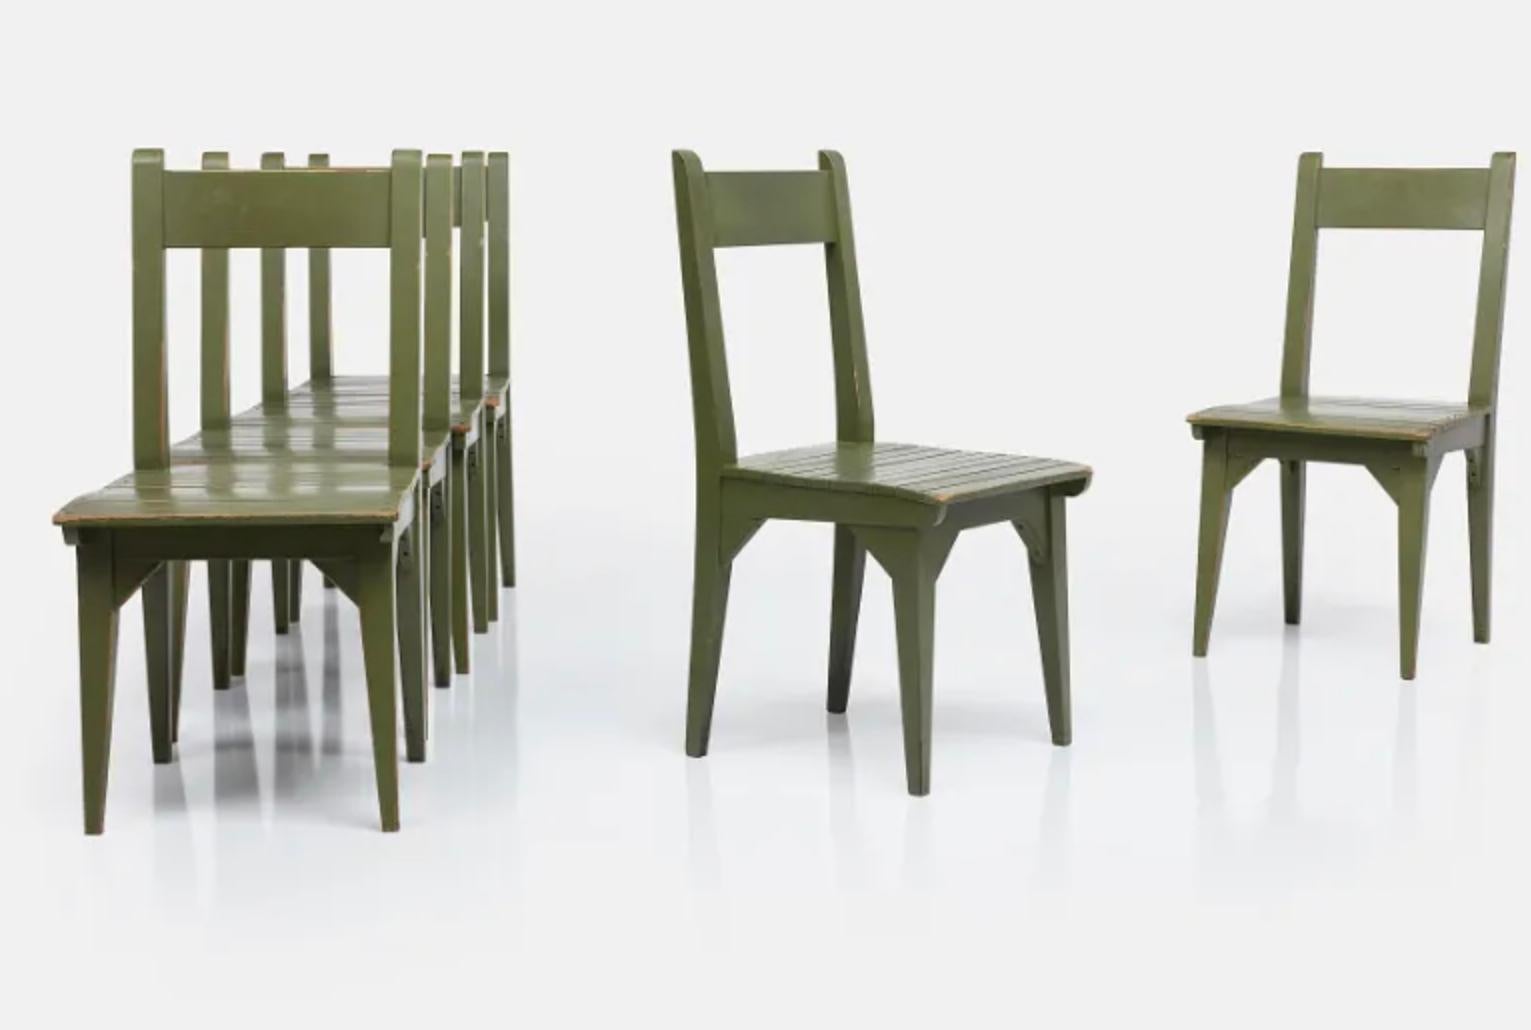 Late 20th Century Roy McMakin Painted Wood Postmodern Dining Chair, Green, 1982, USA. For Sale